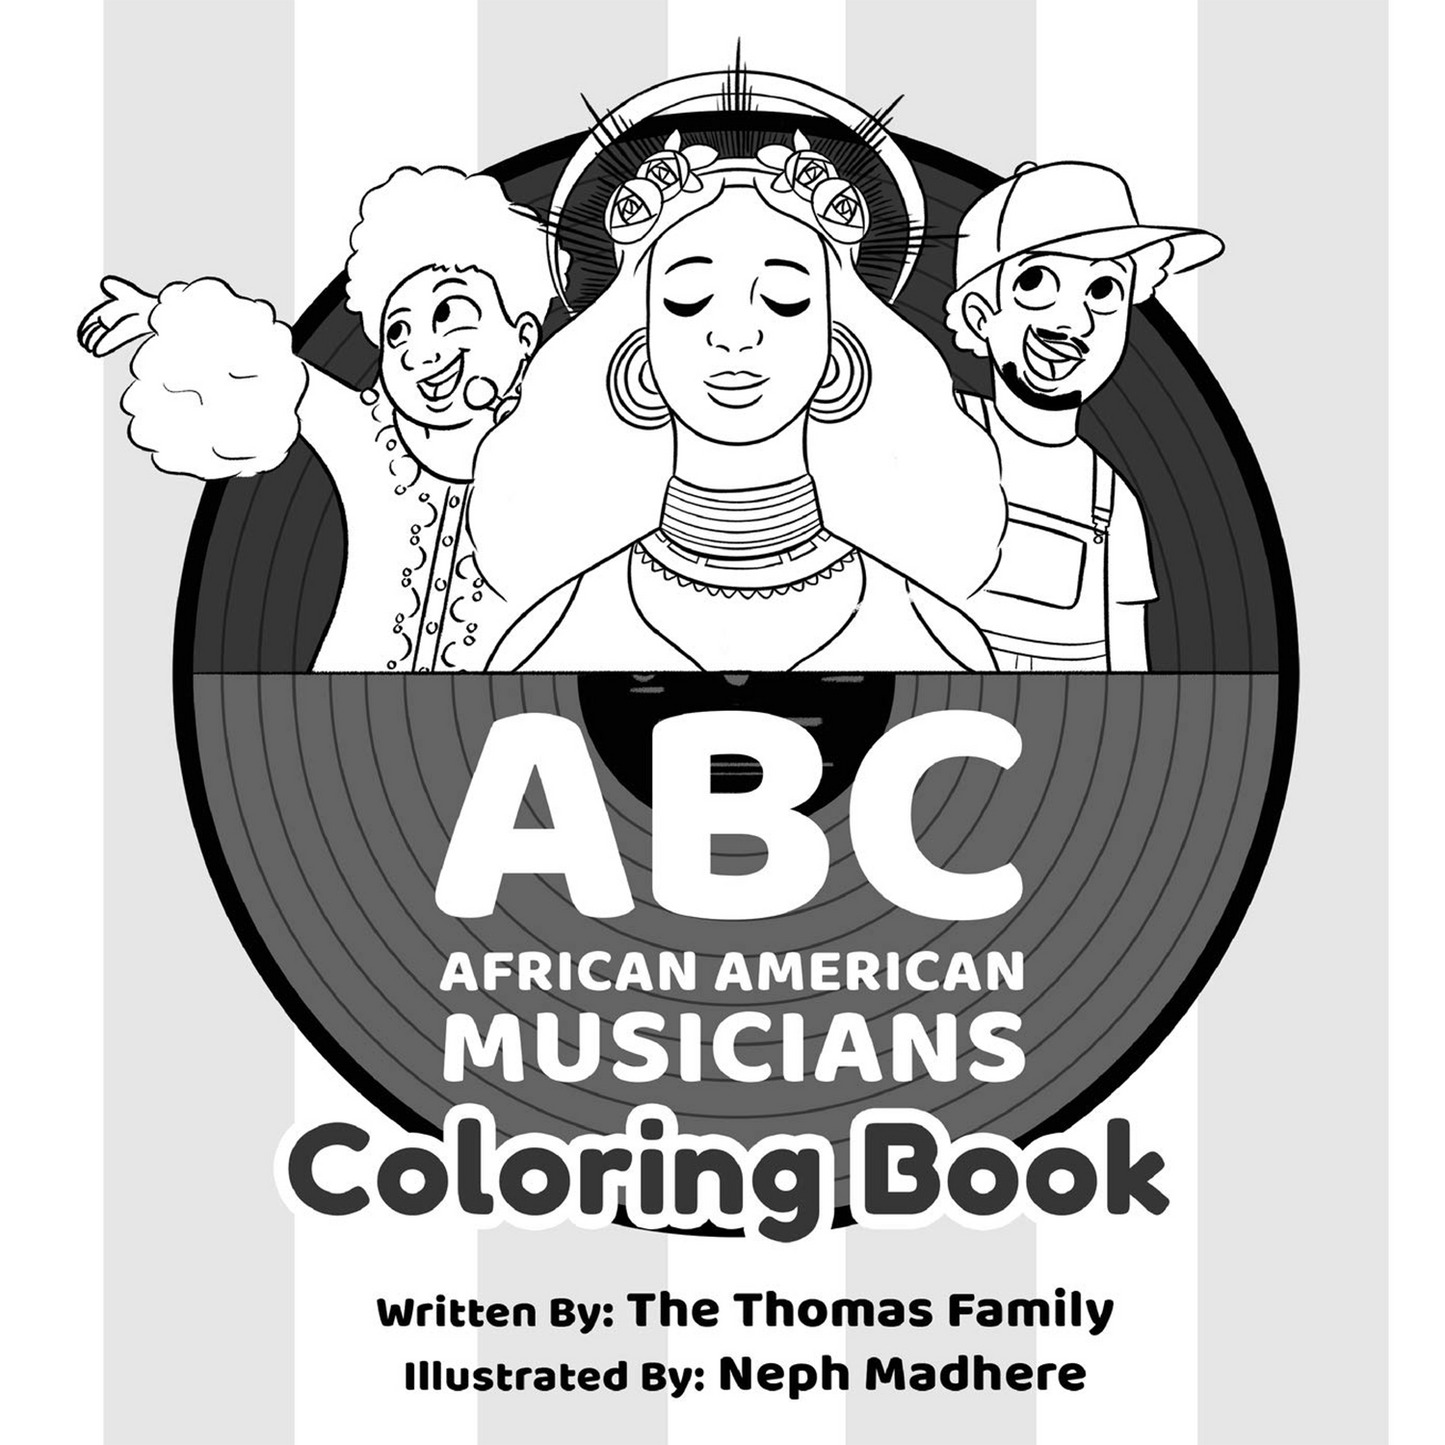 ABC - African American Musicians Coloring Book